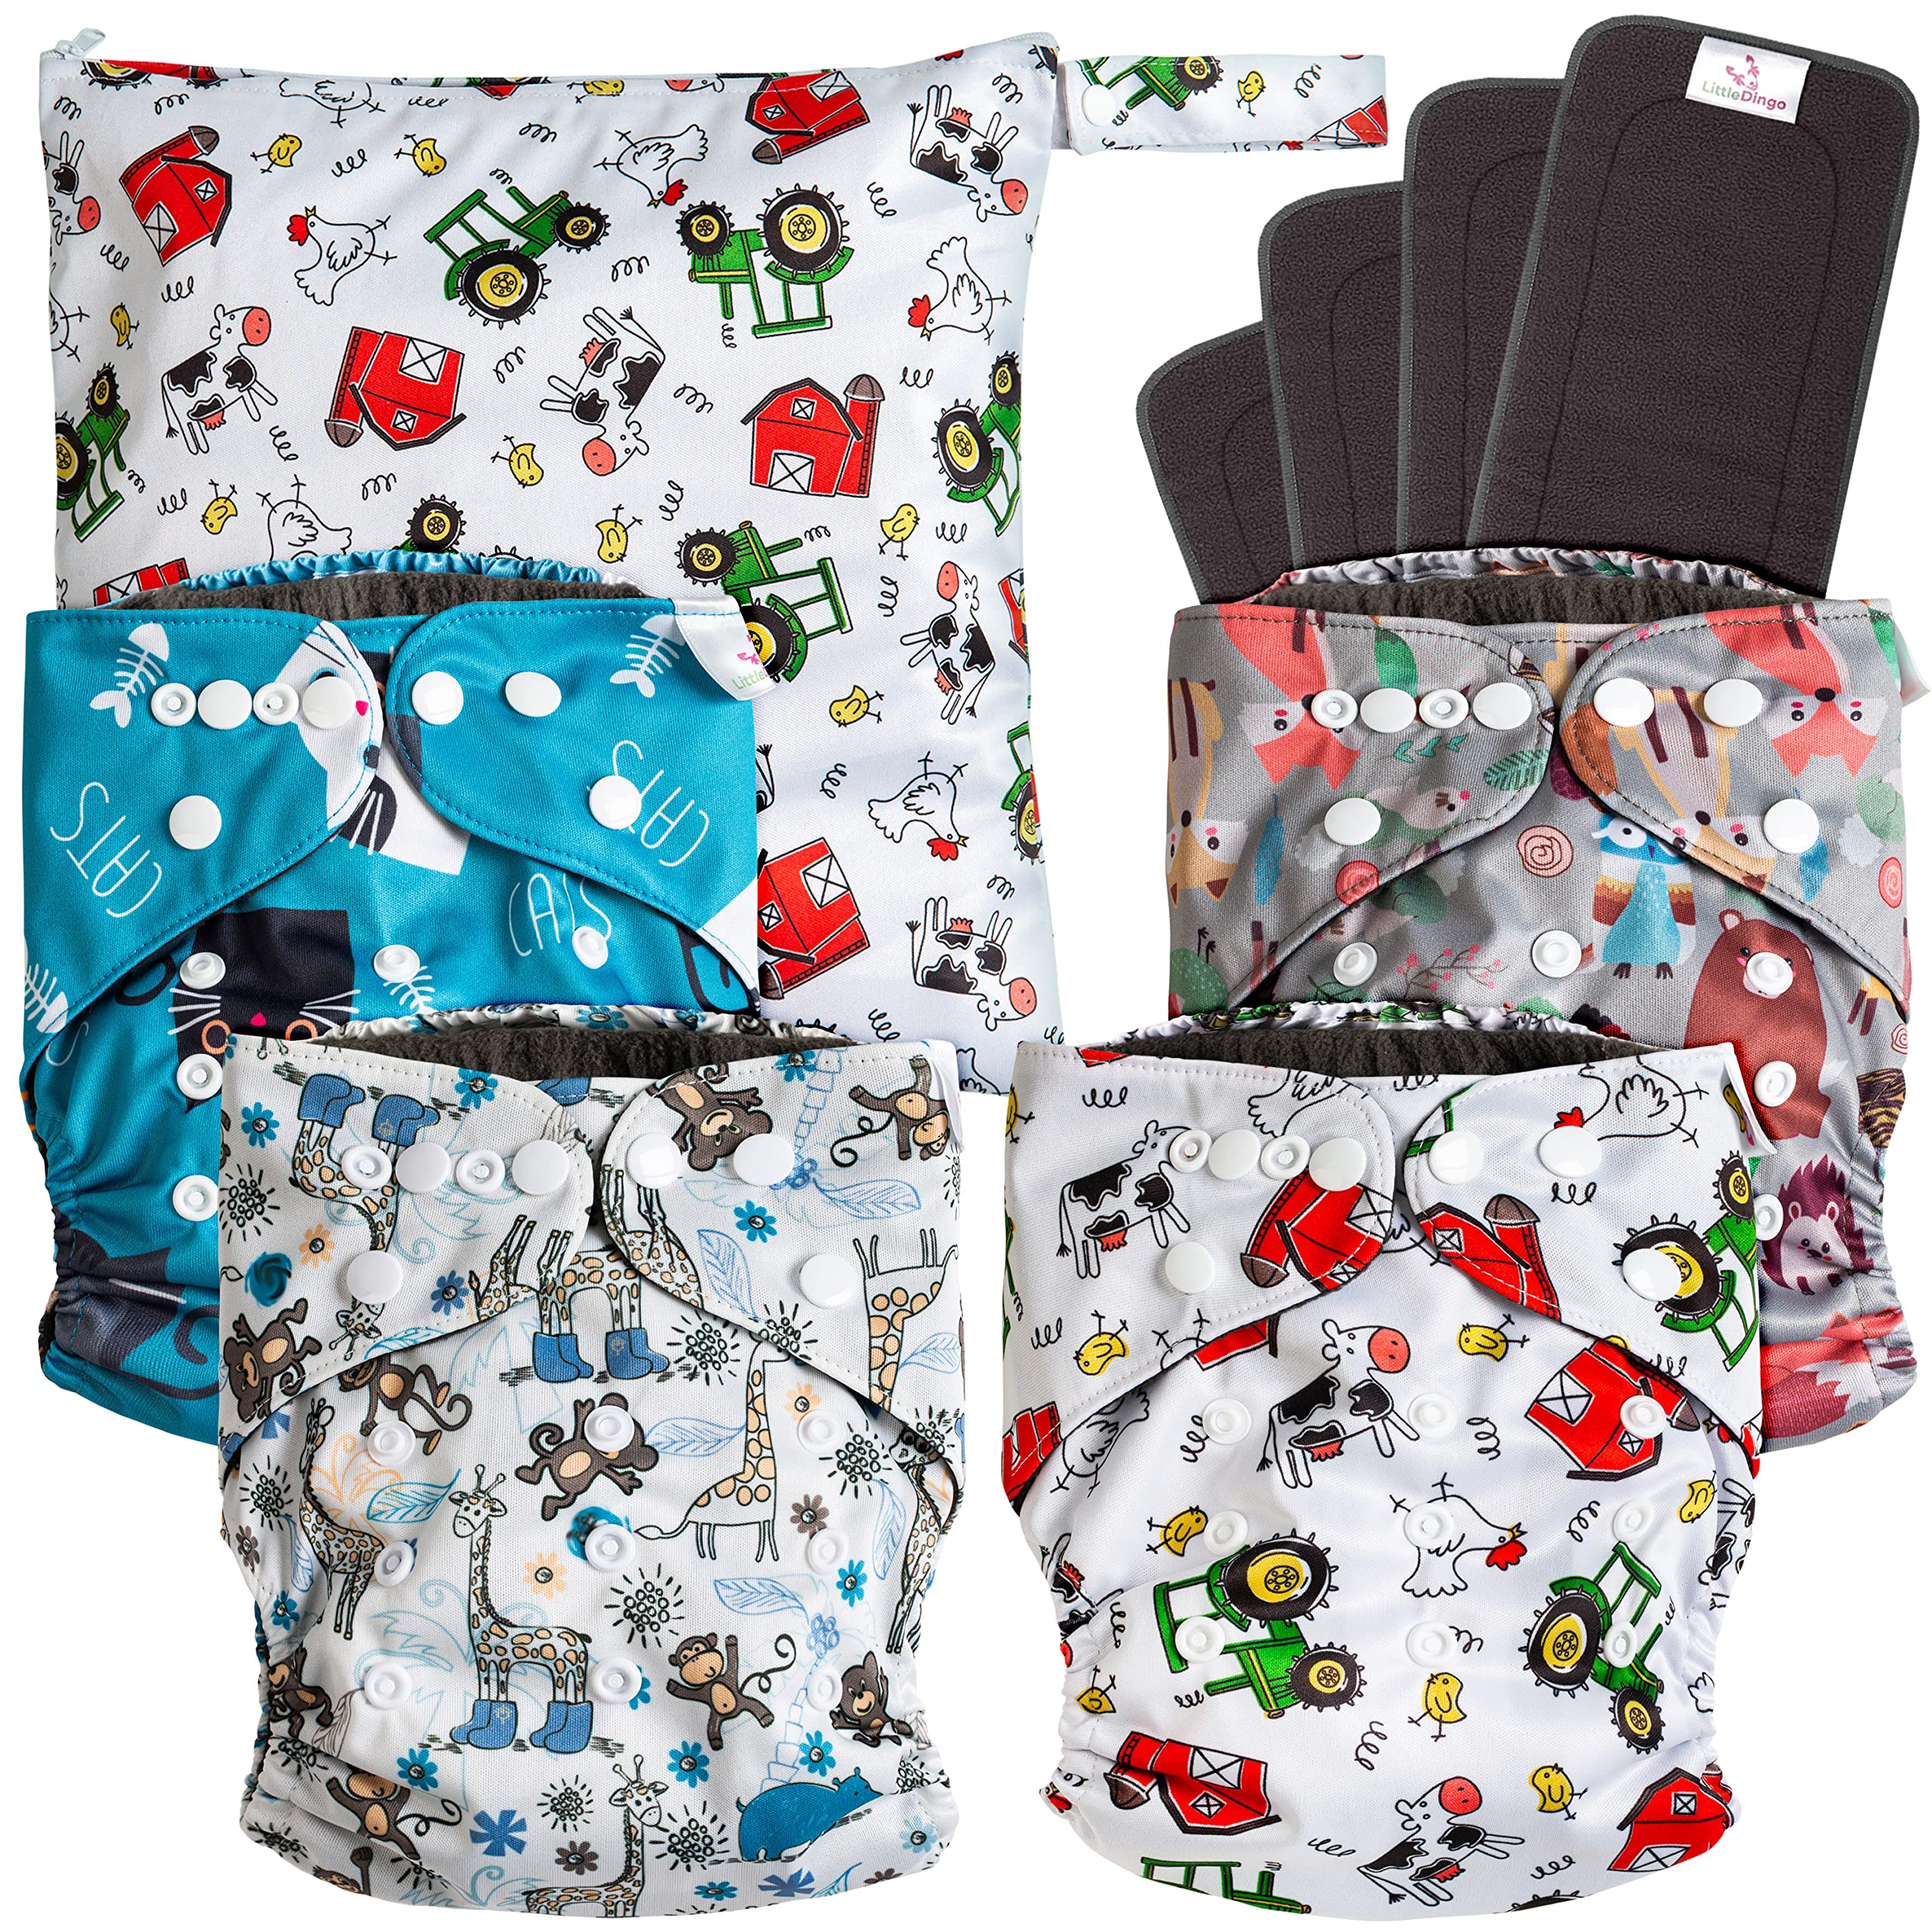 Joyo Roy Baby Cloth Pocket Reusable Diapers 2pieces +2 Bamboo Inserts @  Best Price Online